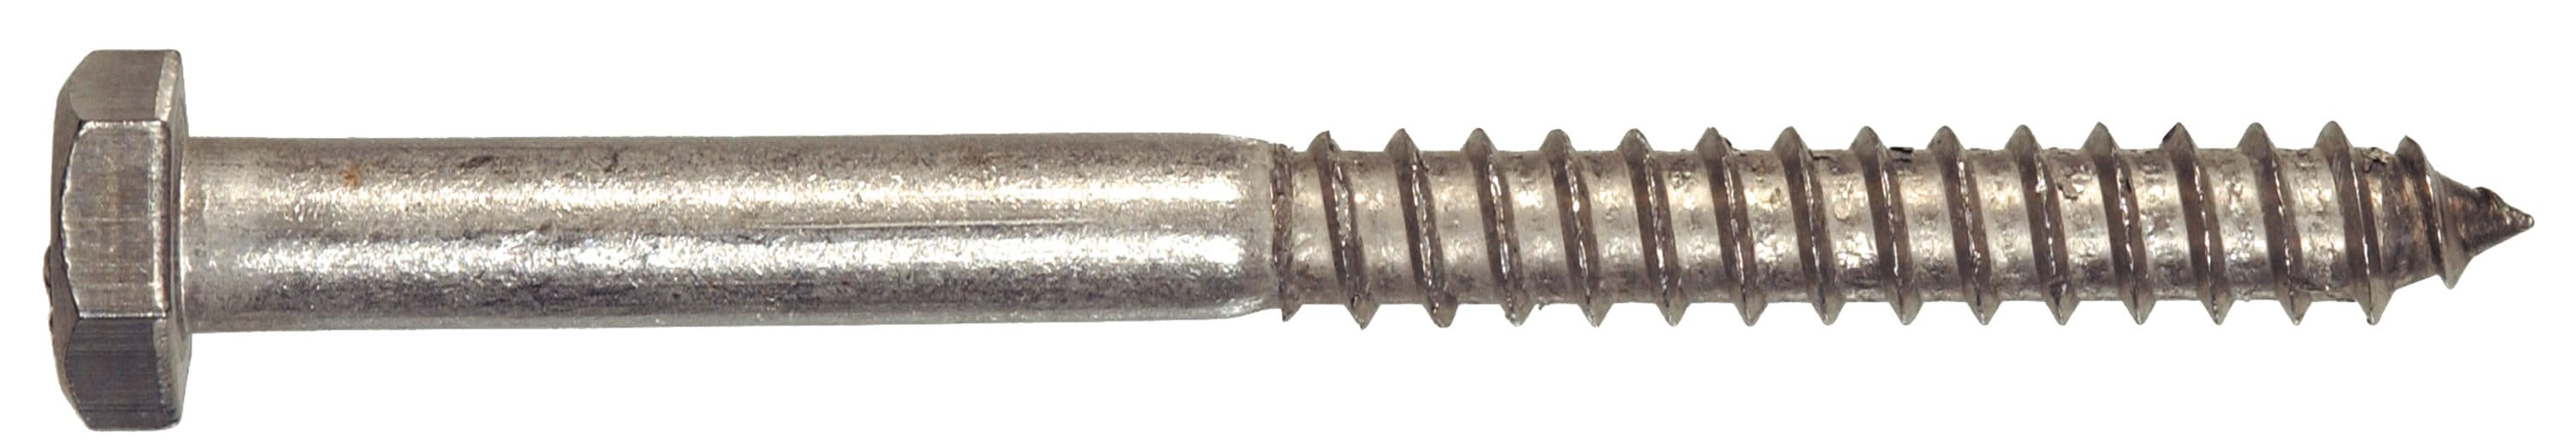 Box of 1 3/8 x 7" Hex Lag Screw 18-8 Stainless Steel 